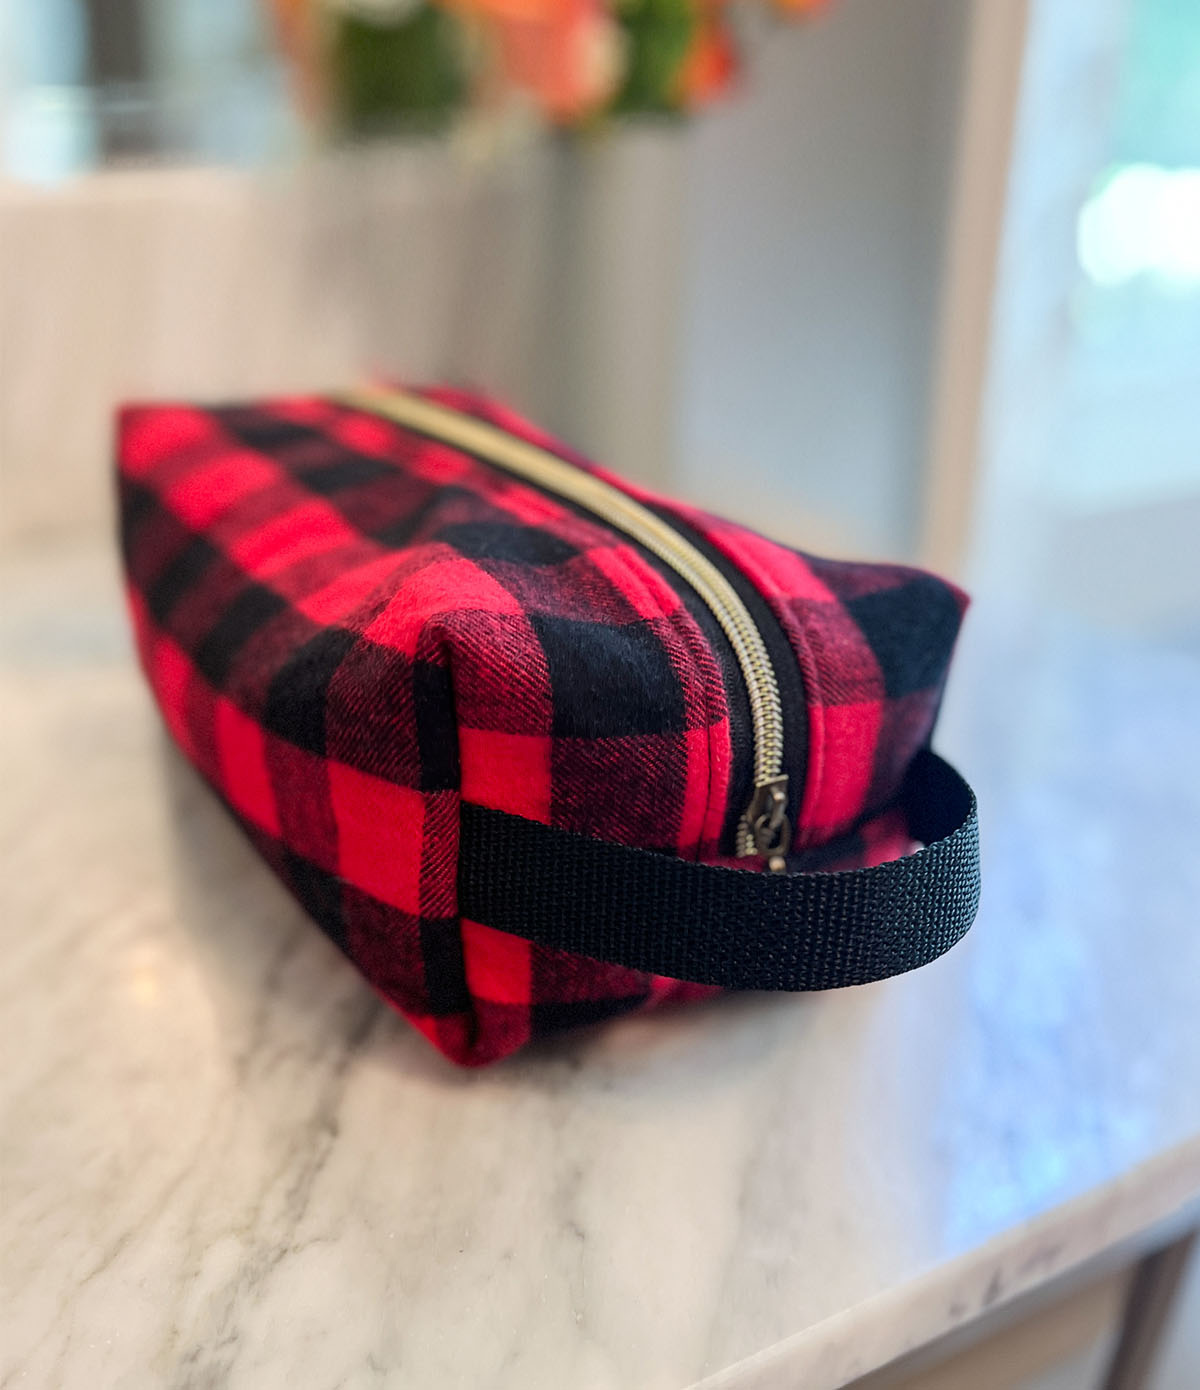 Flannel Toiletry Bag - Red Buffalo